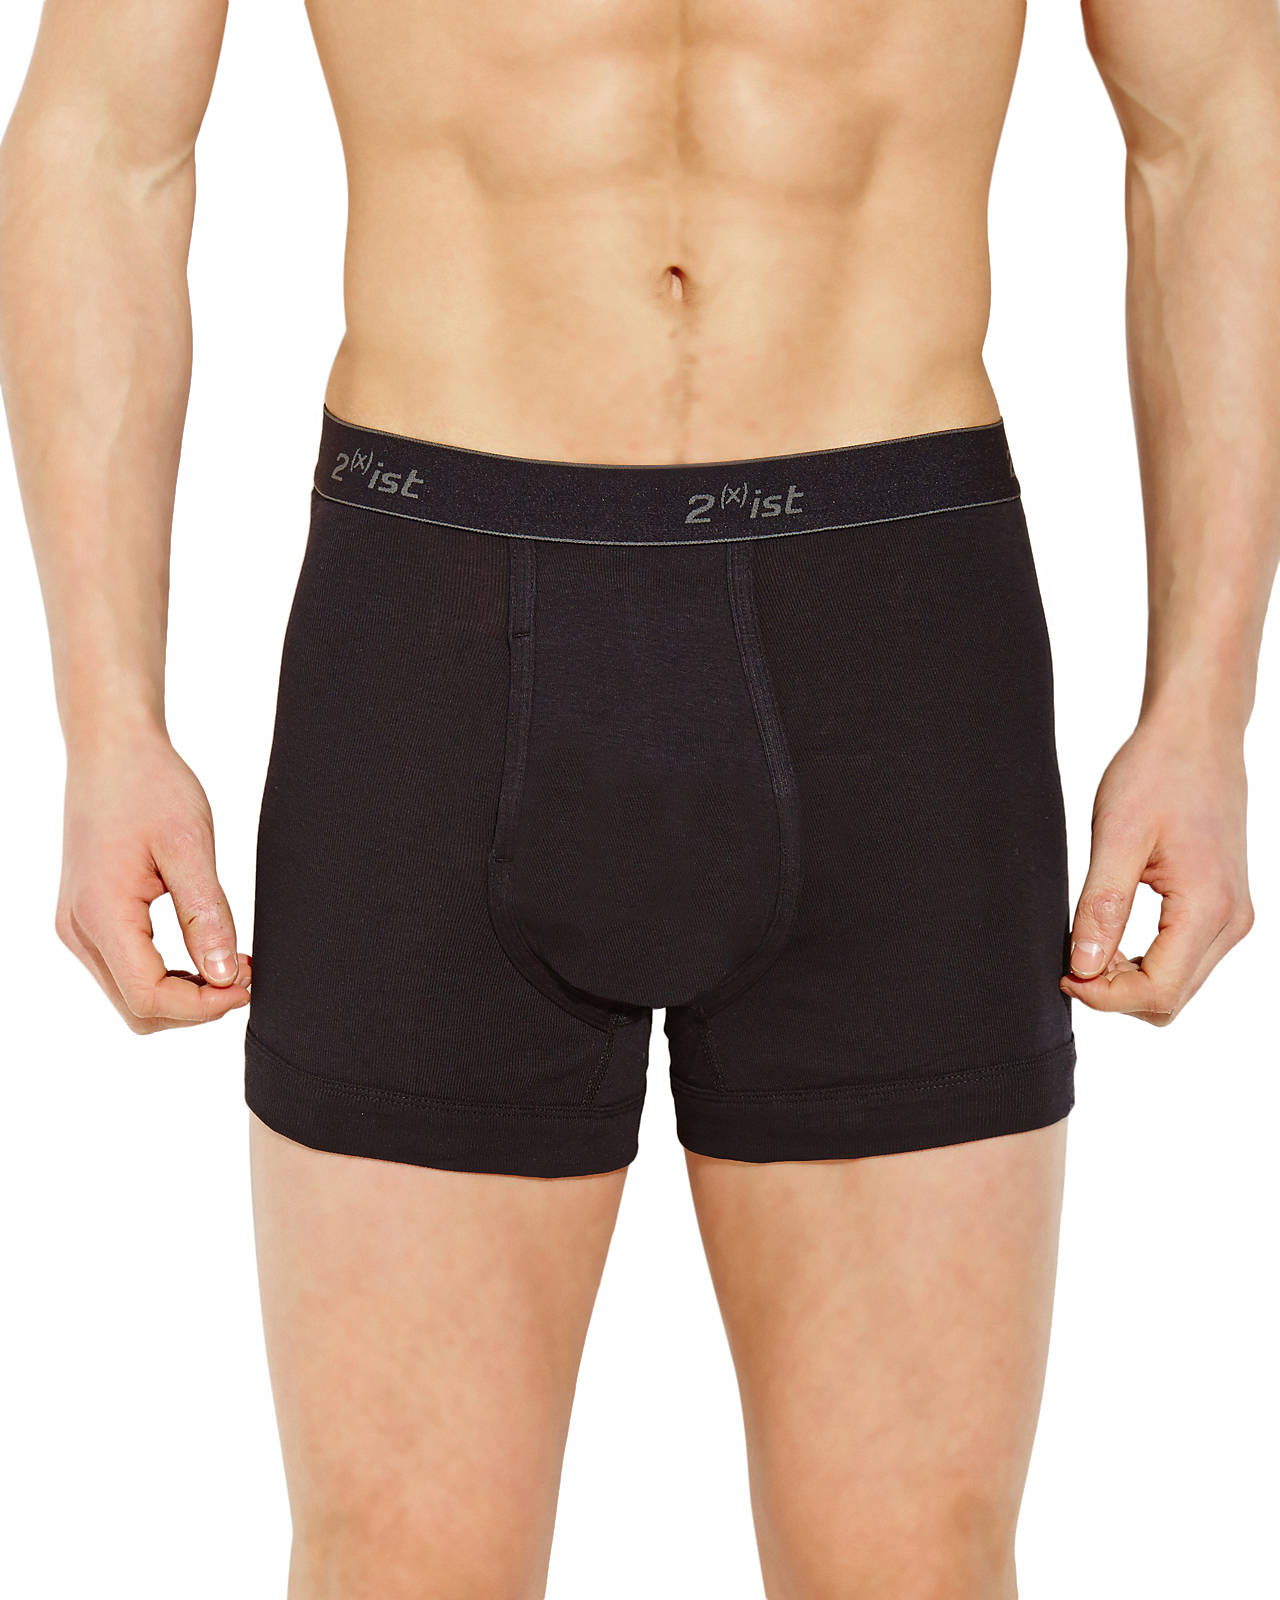 2xist Black 2xist 3 Pack 100 Cotton Boxer Briefs Product 1 25005719 0 584573667 Normal 